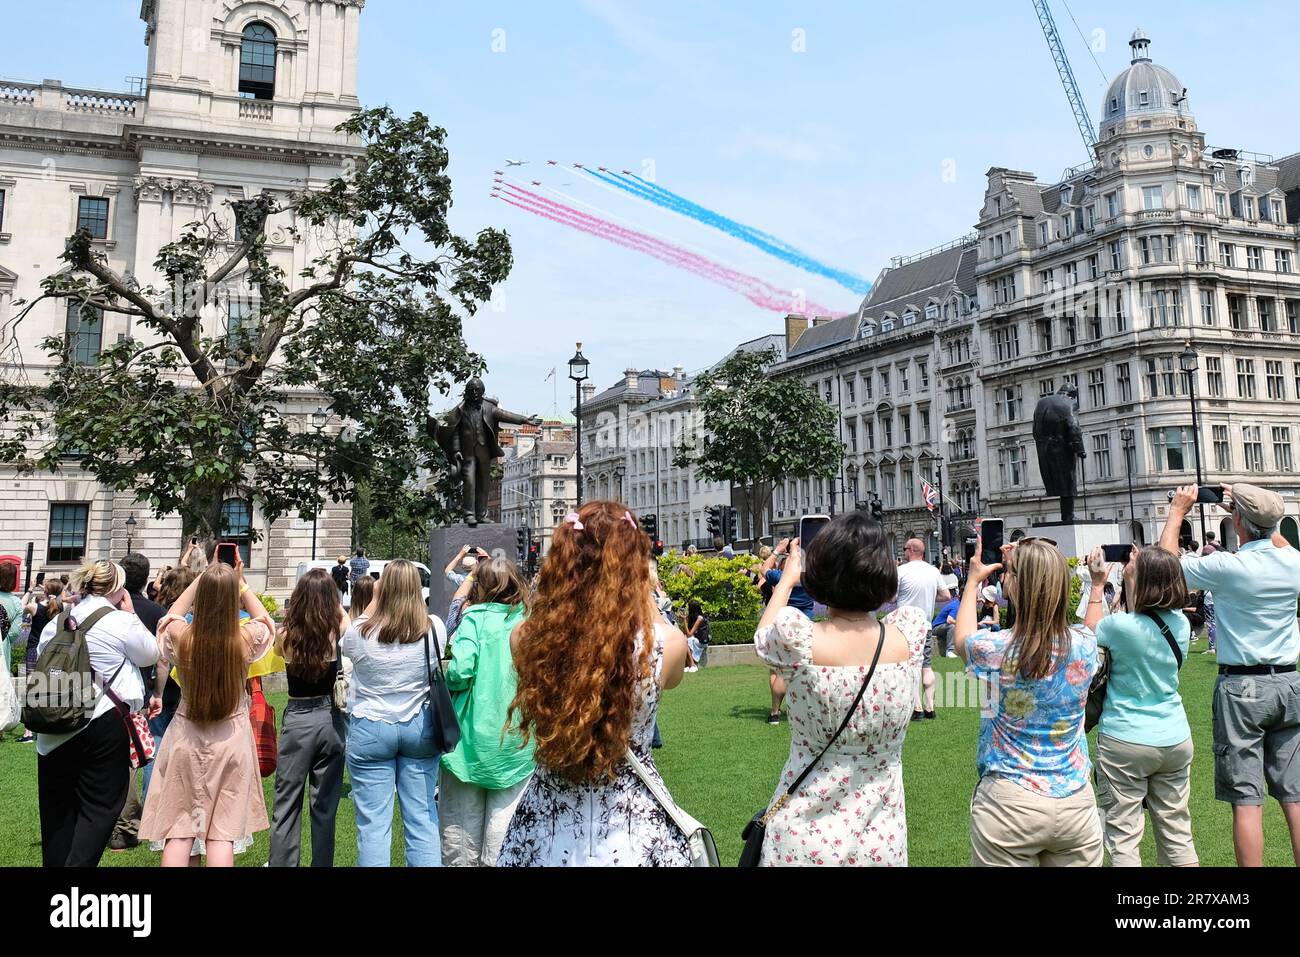 London, UK. 17th June, 2023. Members of the public on parliament Square enjoy the spectacle of the Red Arrows flying over Whitehall. The Trooping the Colour celebrations marking the King's birthday concluded with a flypast, consisting of around 70 aircraft from the Royal Navy, British Army and the Royal Airforce taking part in the extended display, rearranged after May's Coronation flypast was scaled down due to poor weather condtions. Credit: Eleventh Hour Photography/Alamy Live News Stock Photo